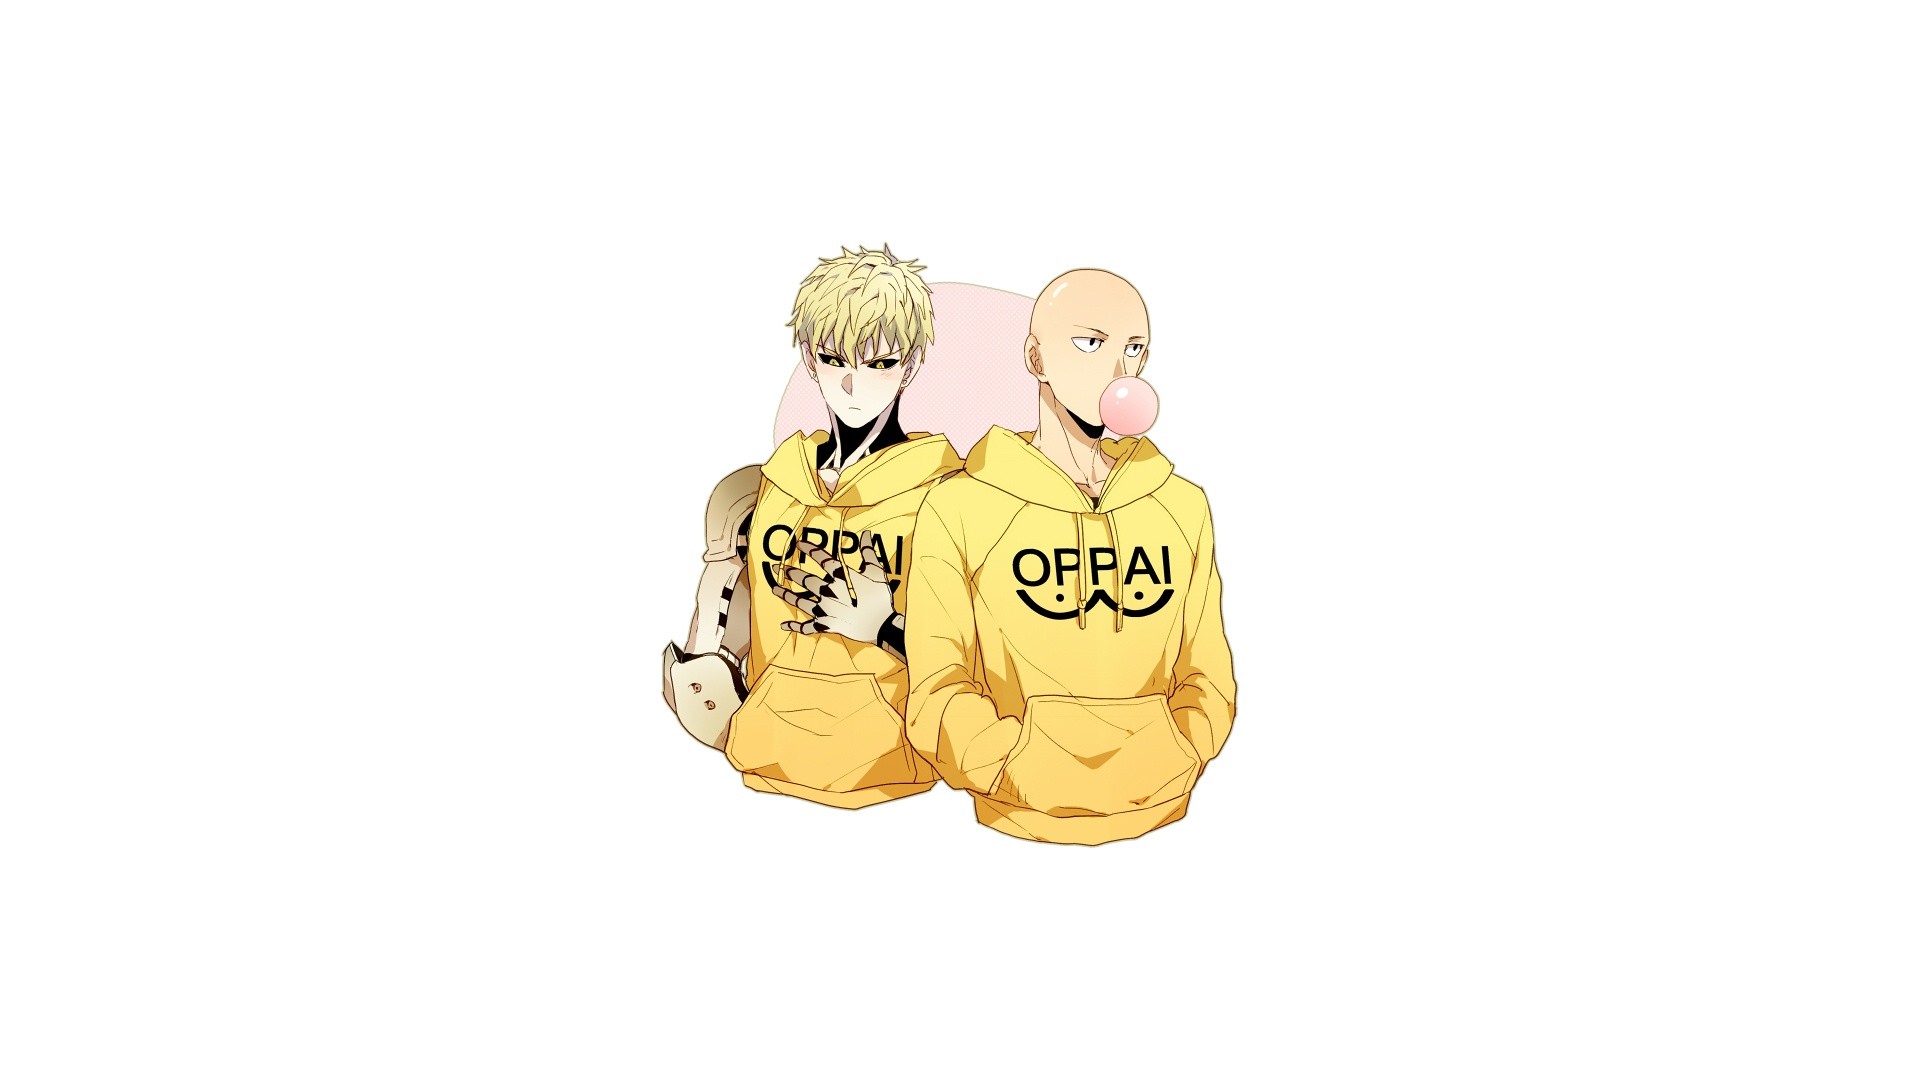 1920x1080 A bag of One Punch Man wallpapers.